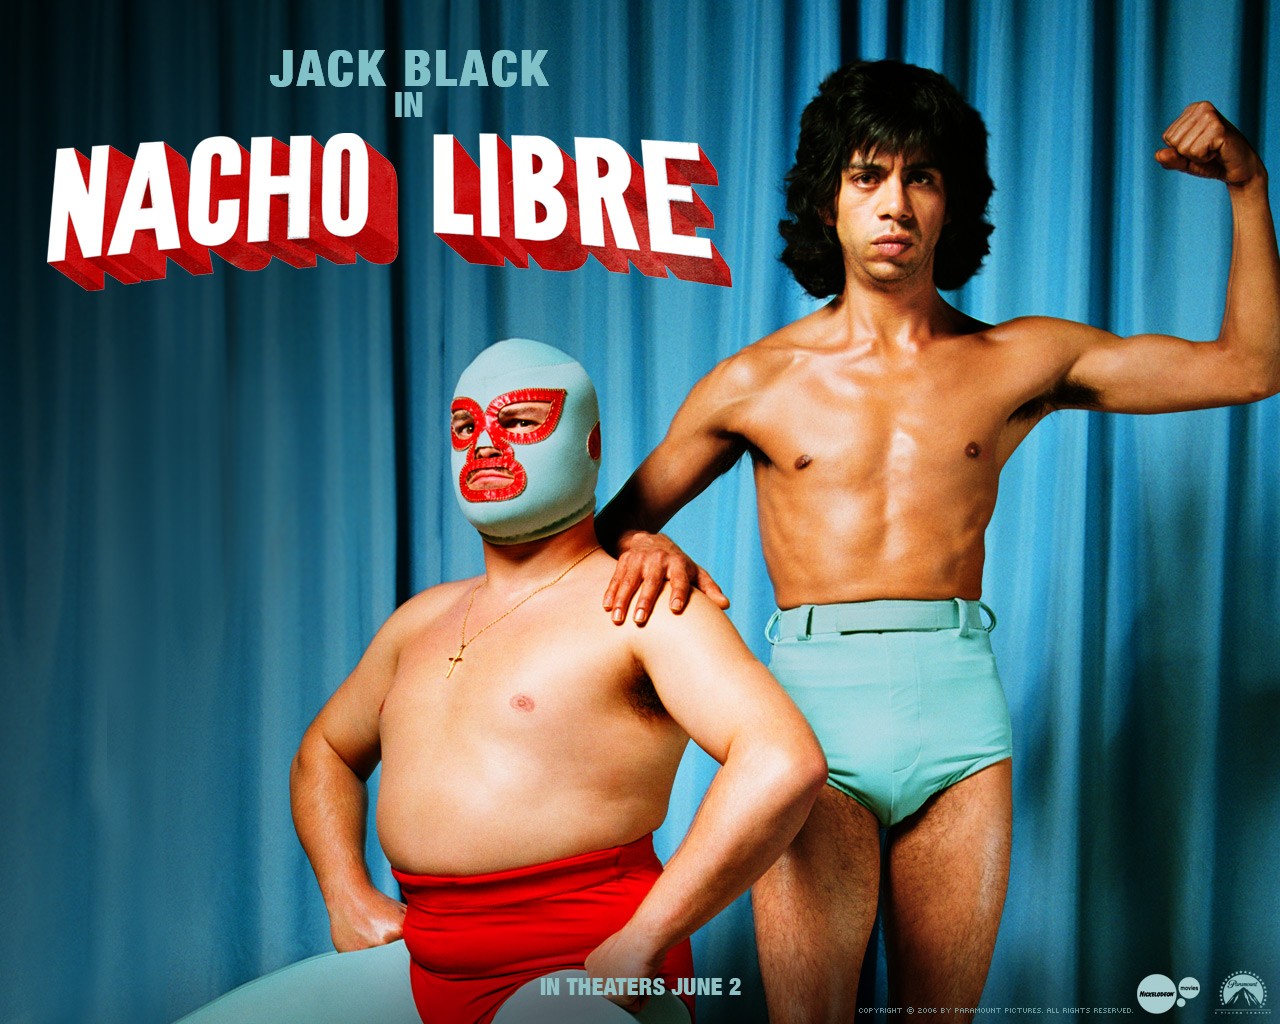 People 1280x1024 Lucha Libre Jack Black humor men flexing movies face mask cyan blue movie poster